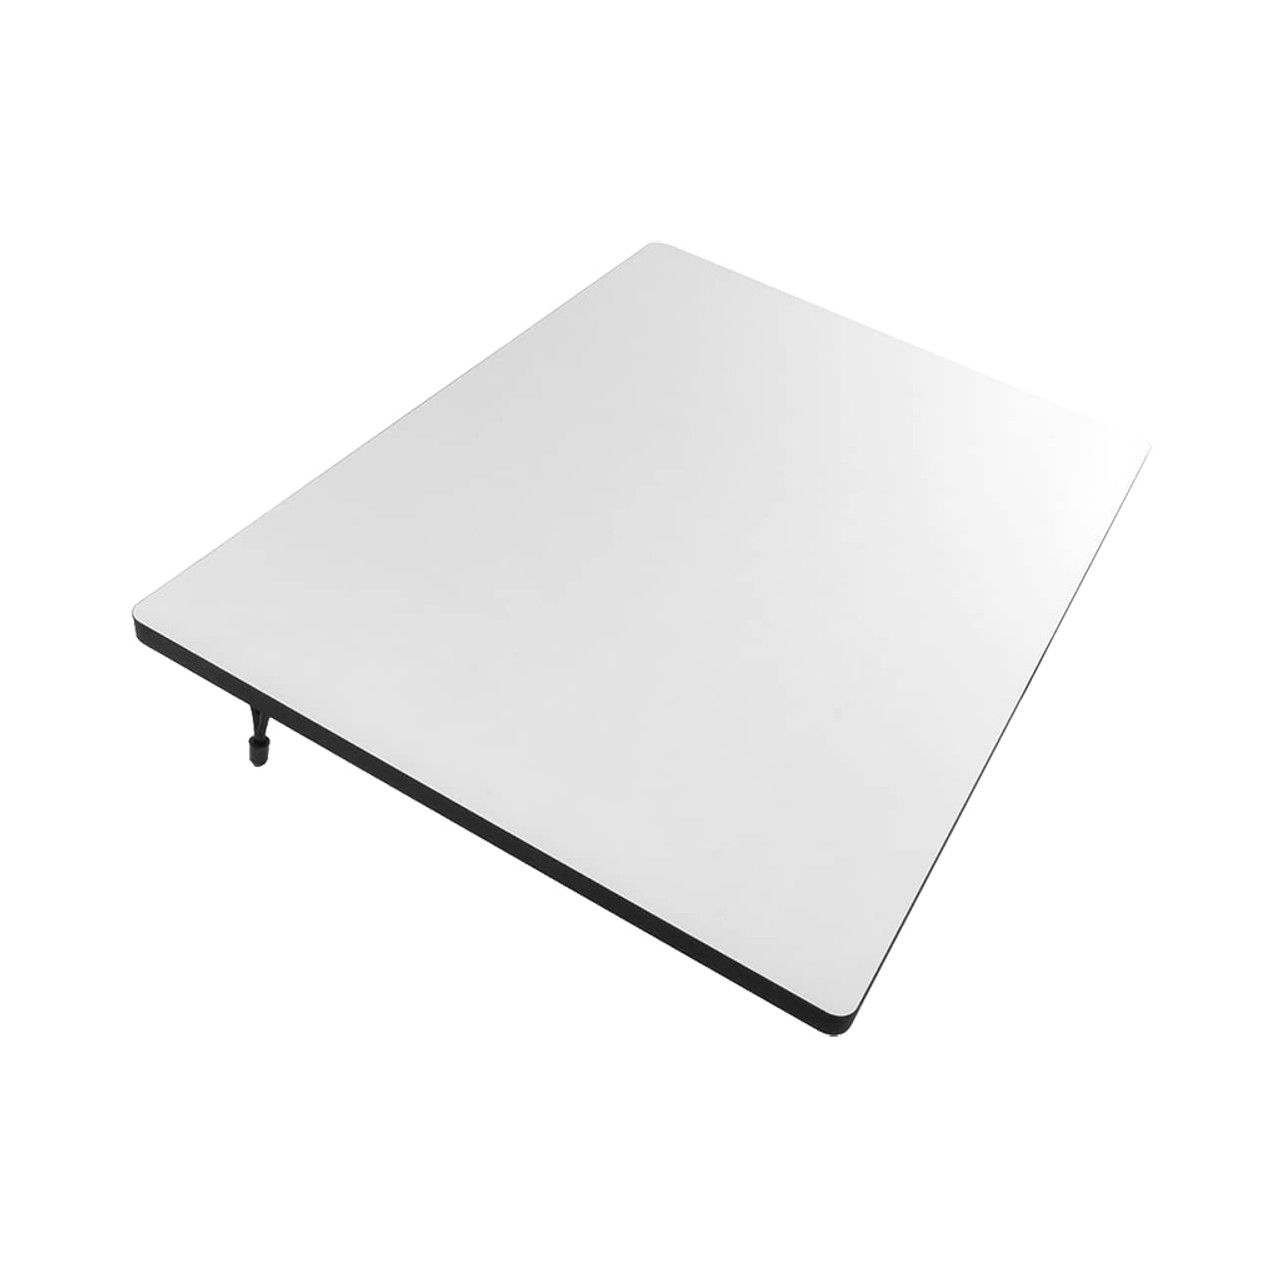 Pacific Arc STP-Series Portable Drawing Board, 18 x 24